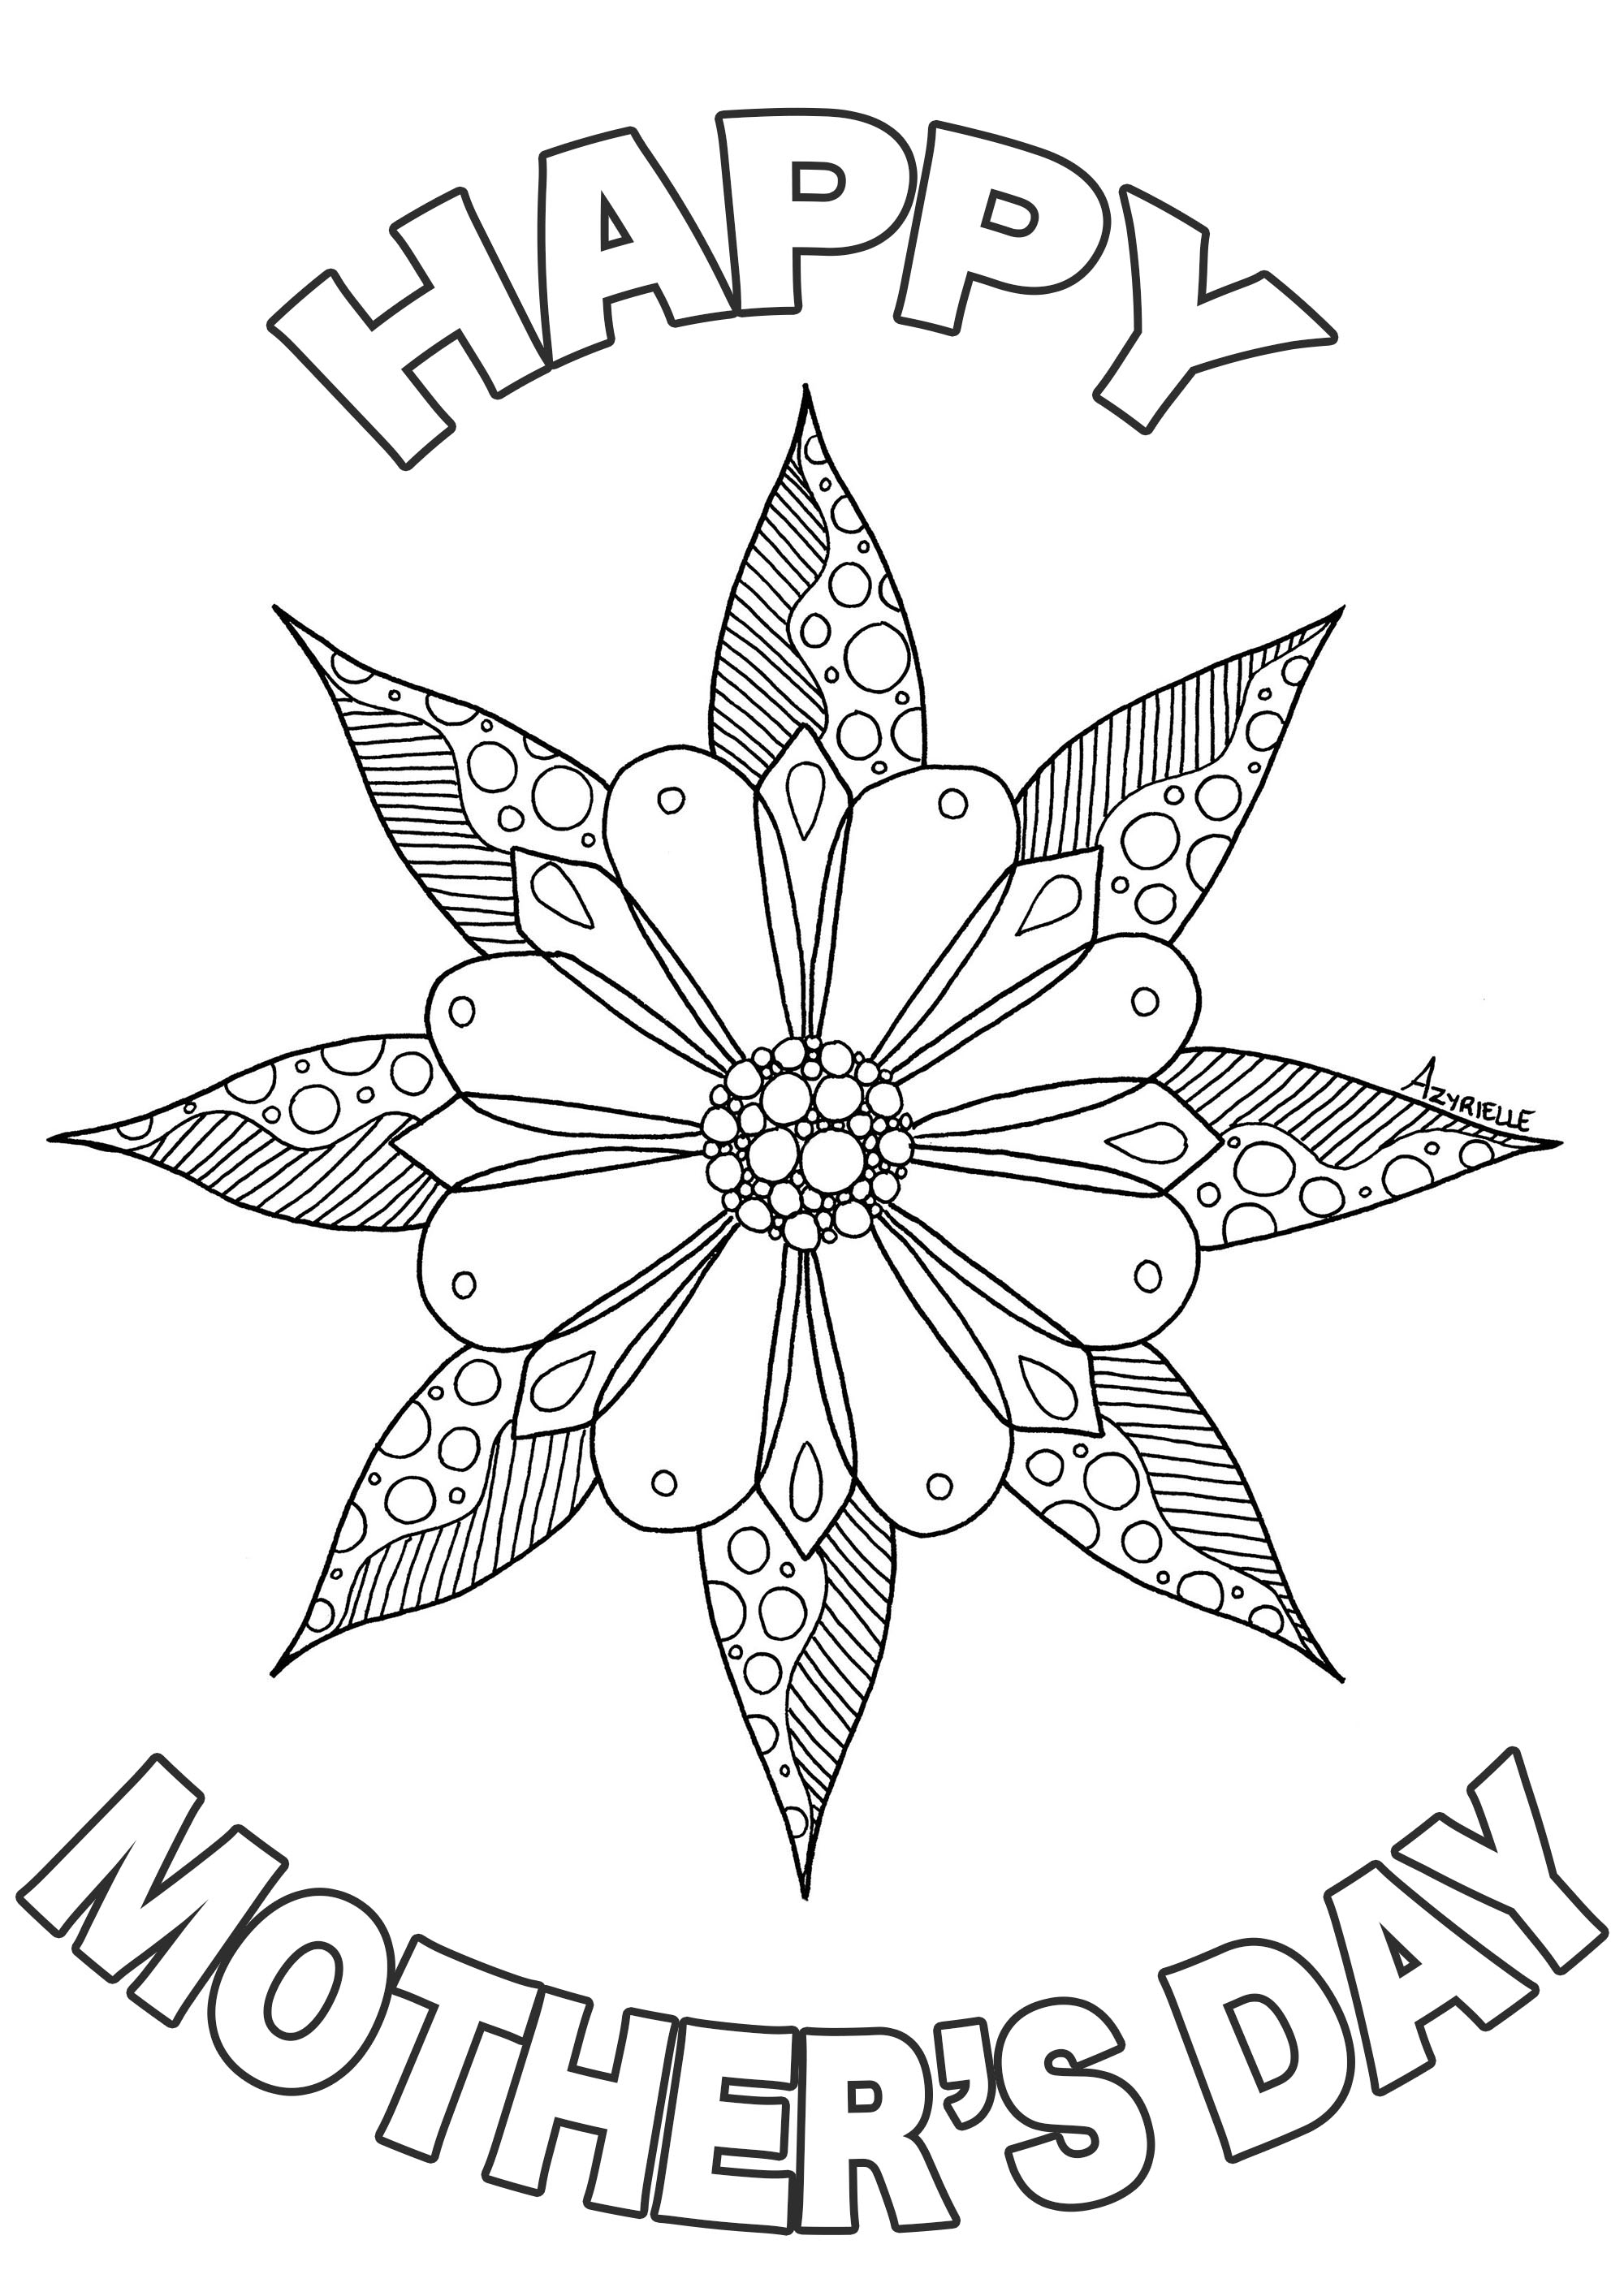 Happy Mother's day coloring page : beautiful flowers